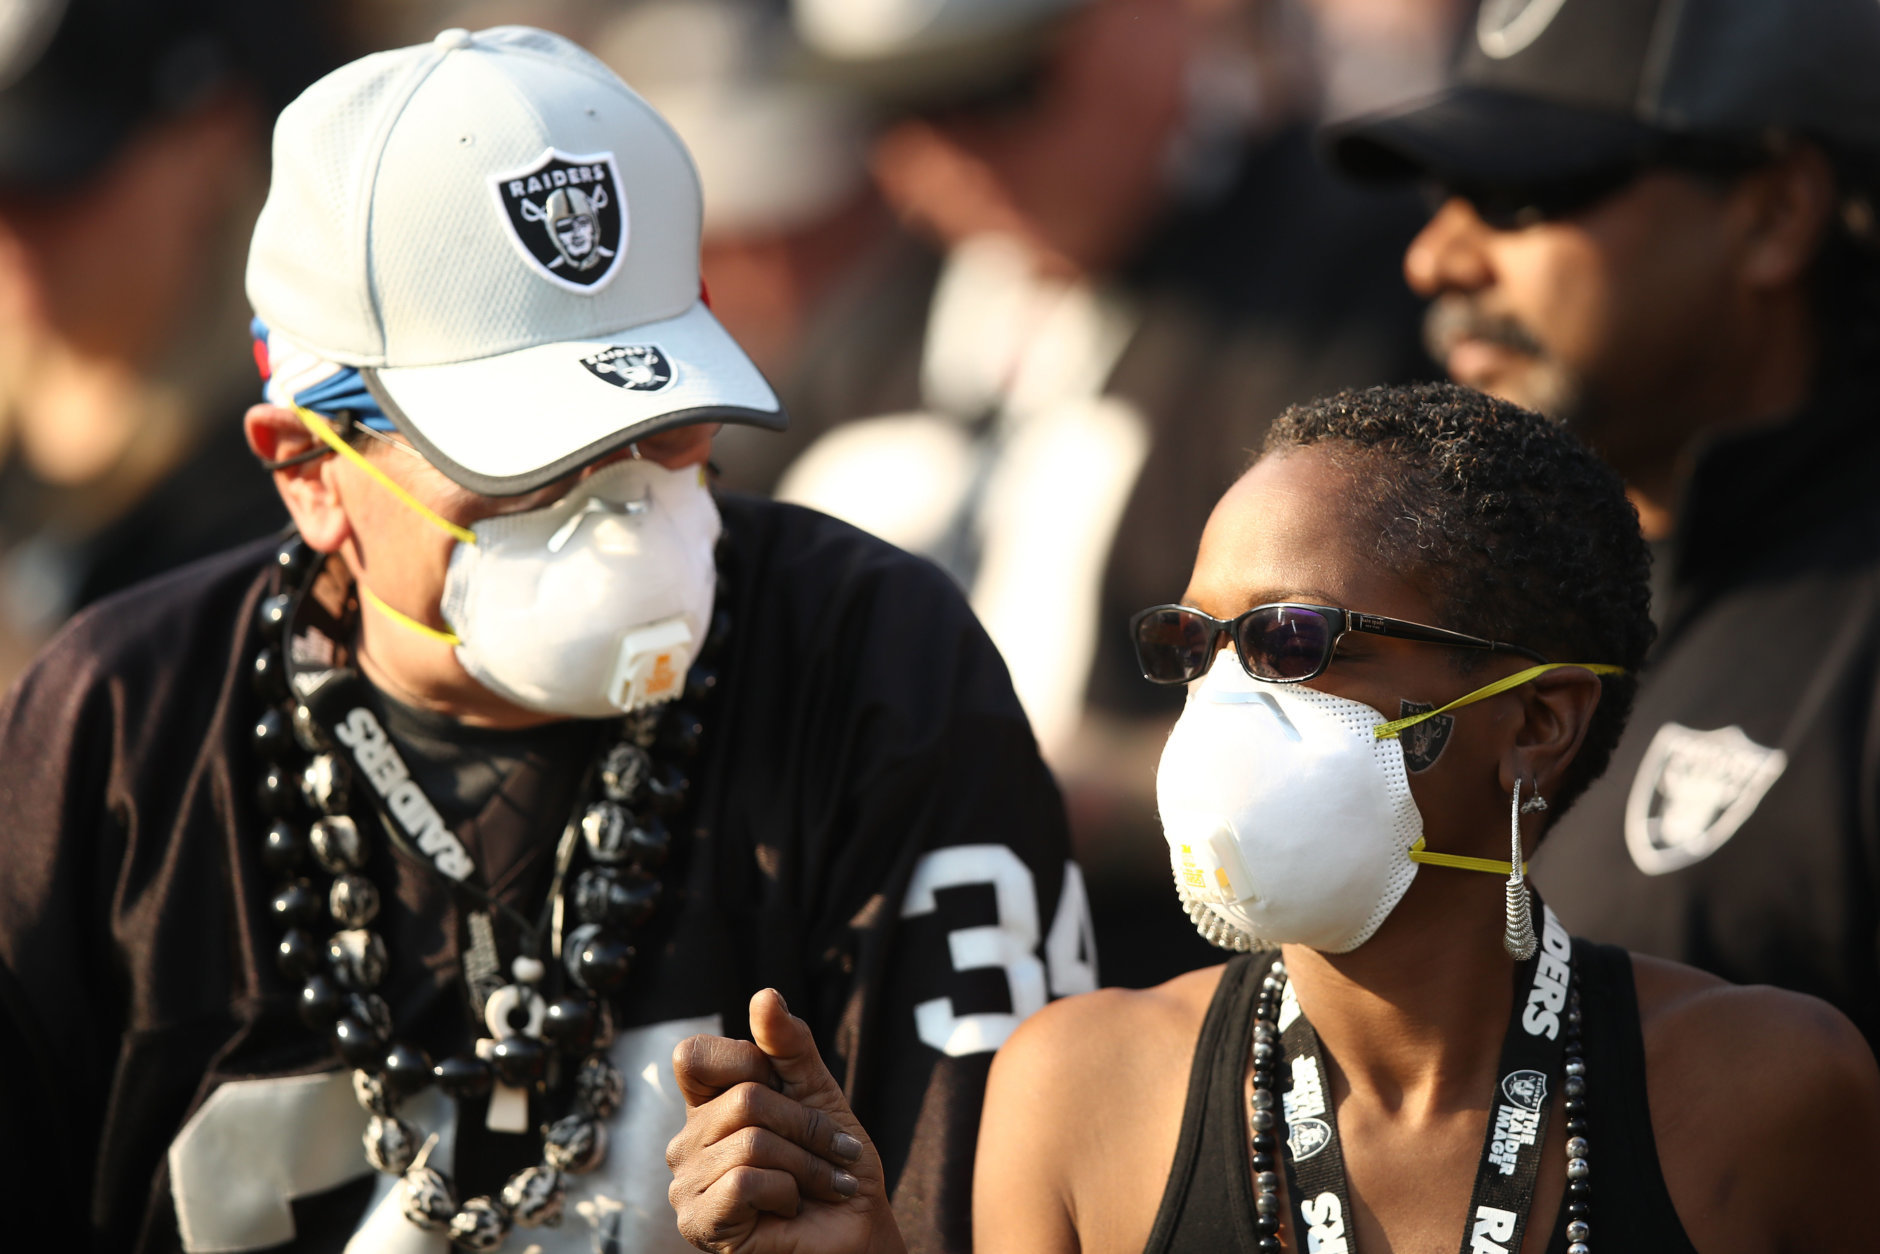 OAKLAND, CA - NOVEMBER 11: Fans wear face masks in the stands during the NFL game between the Oakland Raiders and the Los Angeles Chargers at Oakland-Alameda County Coliseum on November 11, 2018 in Oakland, California. An Air Quality Advisory was issued due to heavy wildfire smoke in parts of the Bay Area from the Camp Fire in Butte County. (Photo by Ezra Shaw/Getty Images)